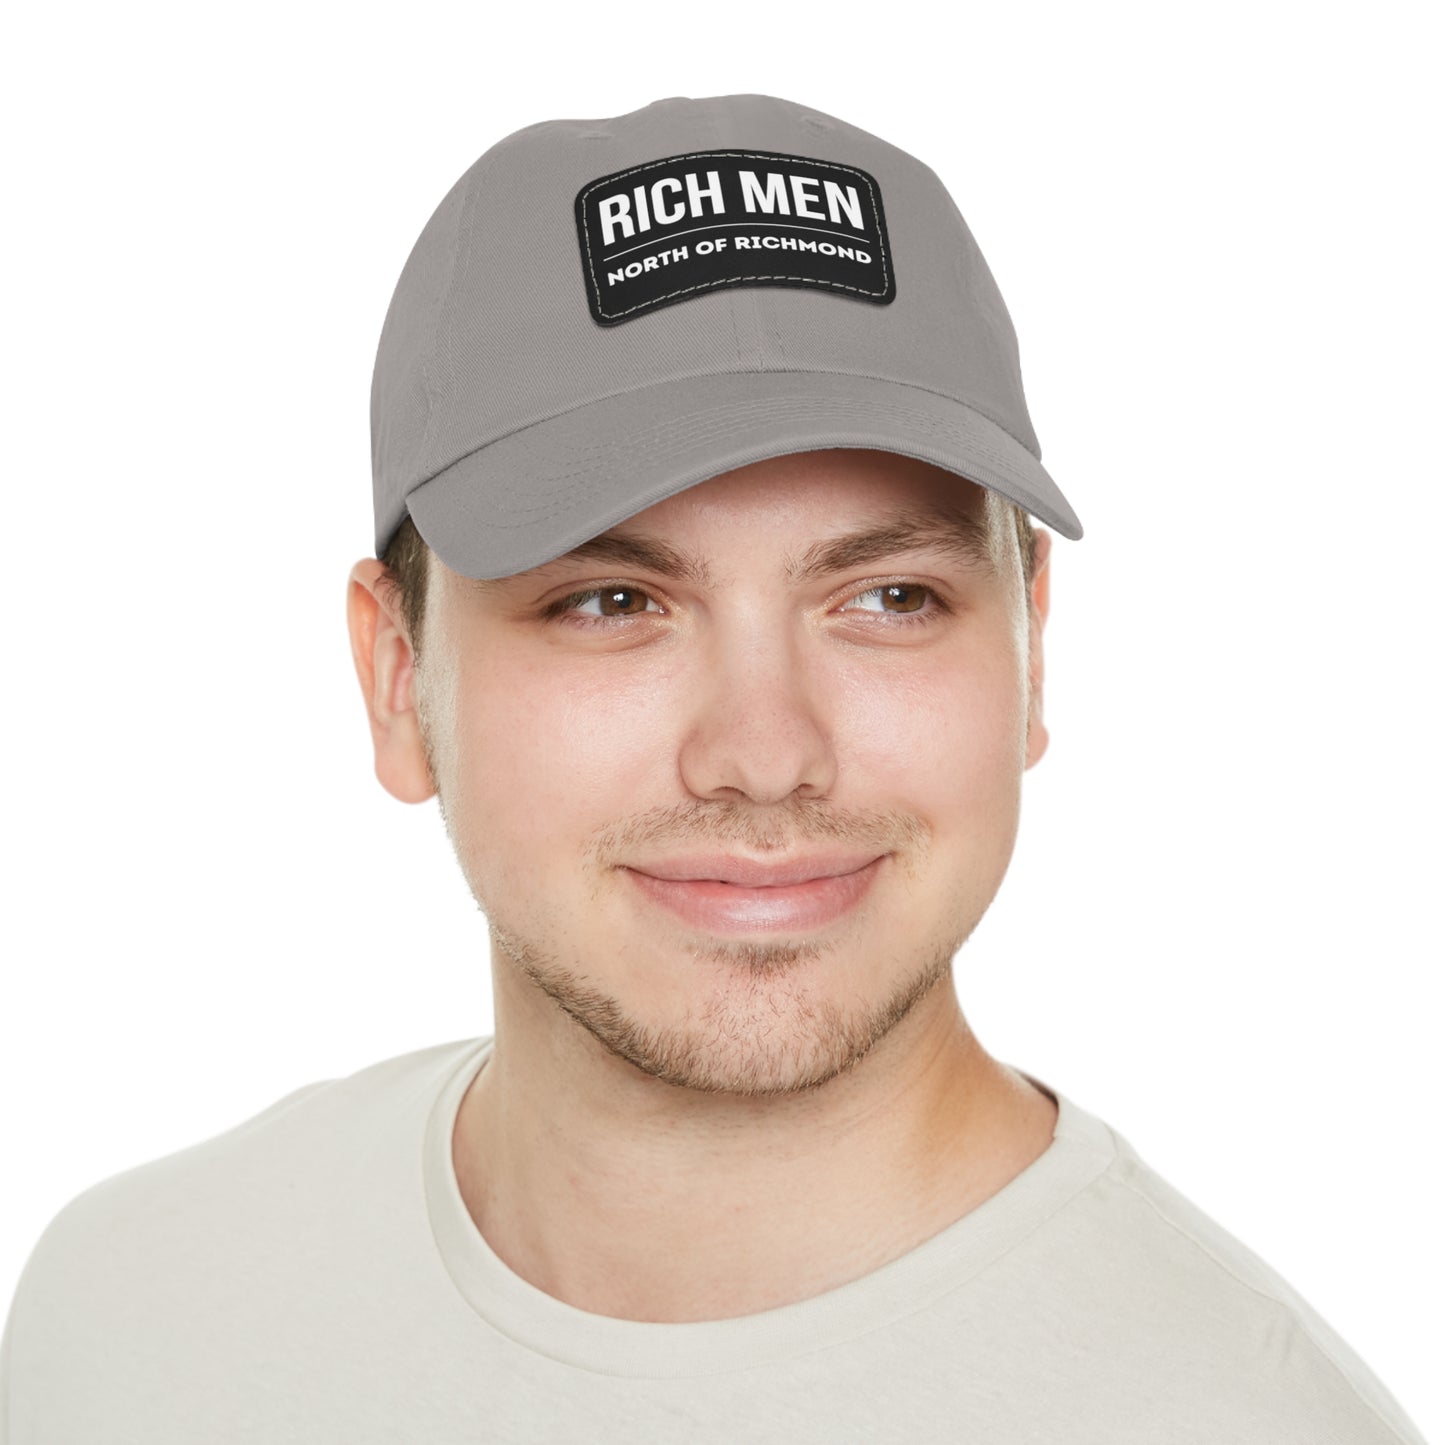 Rich Men North of Richmond Dad Hat with Leather Patch (Rectangle)